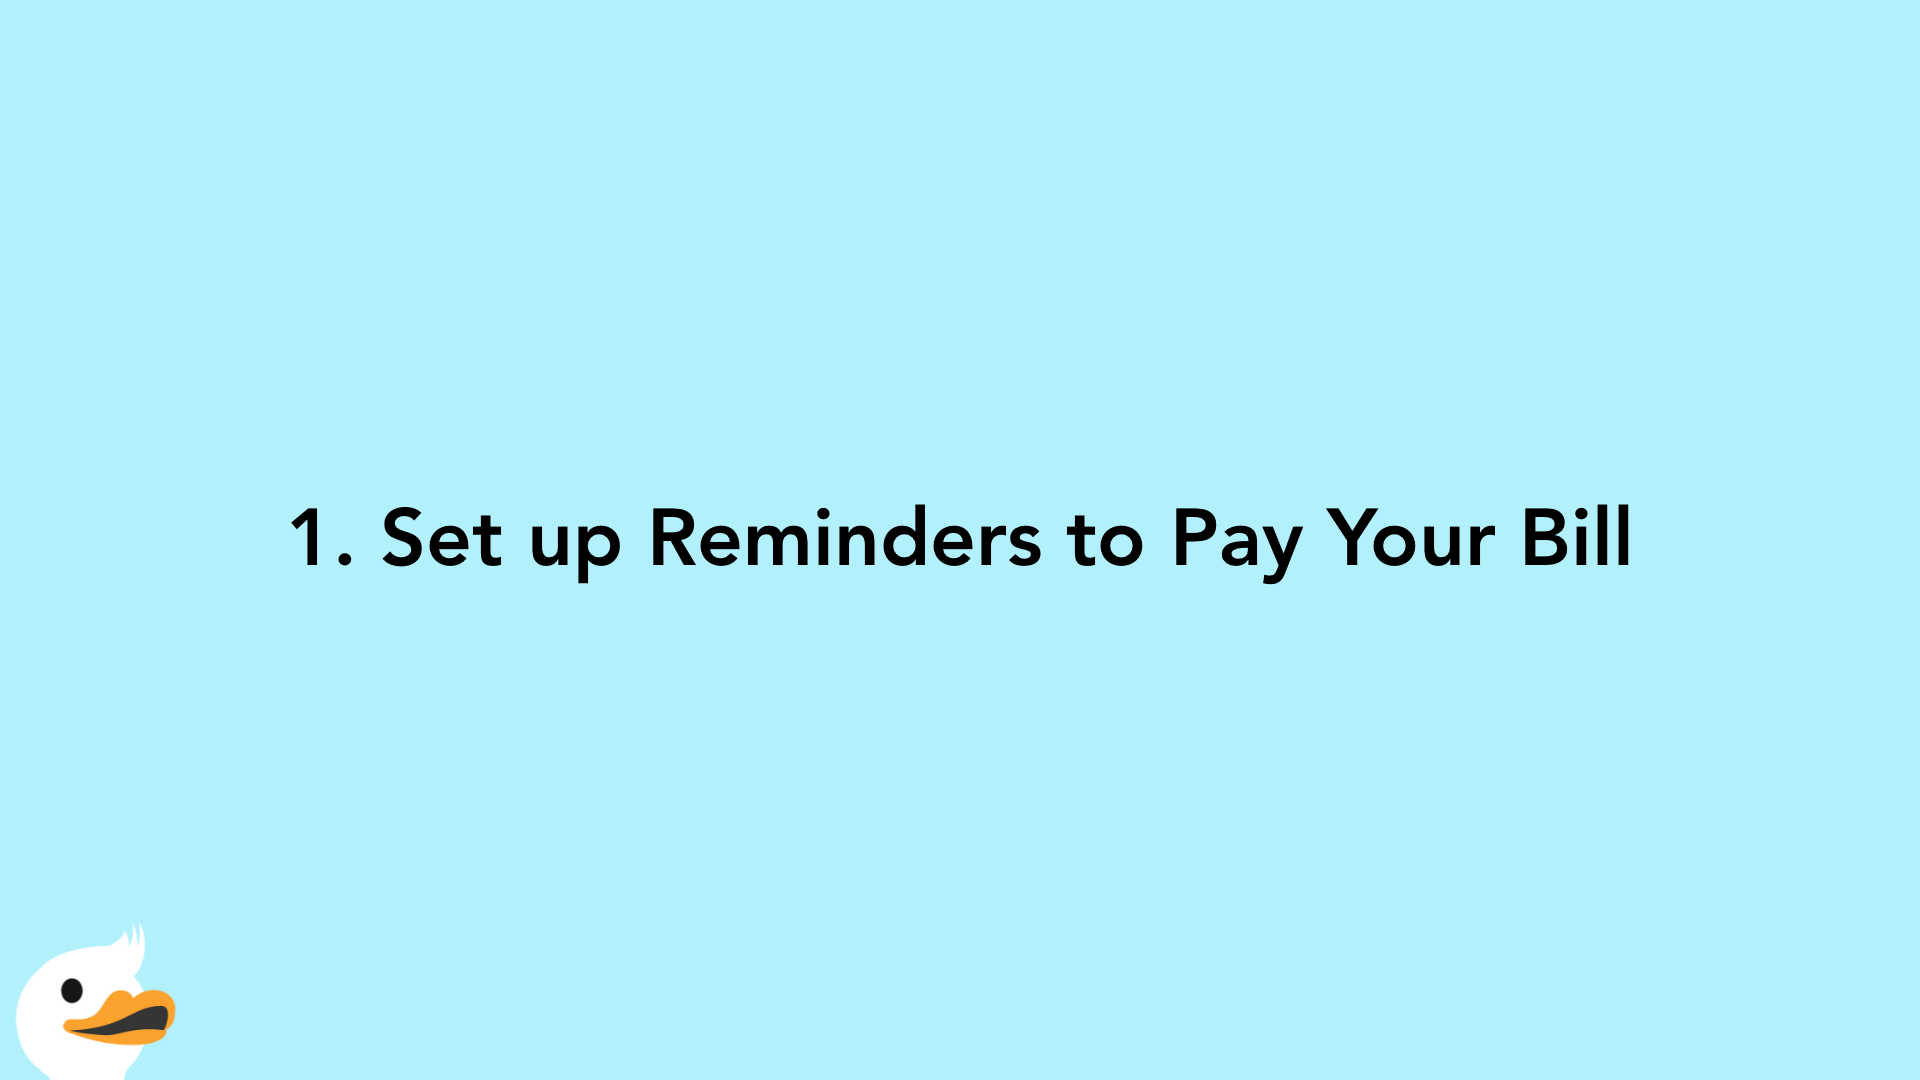 1. Set up Reminders to Pay Your Bill